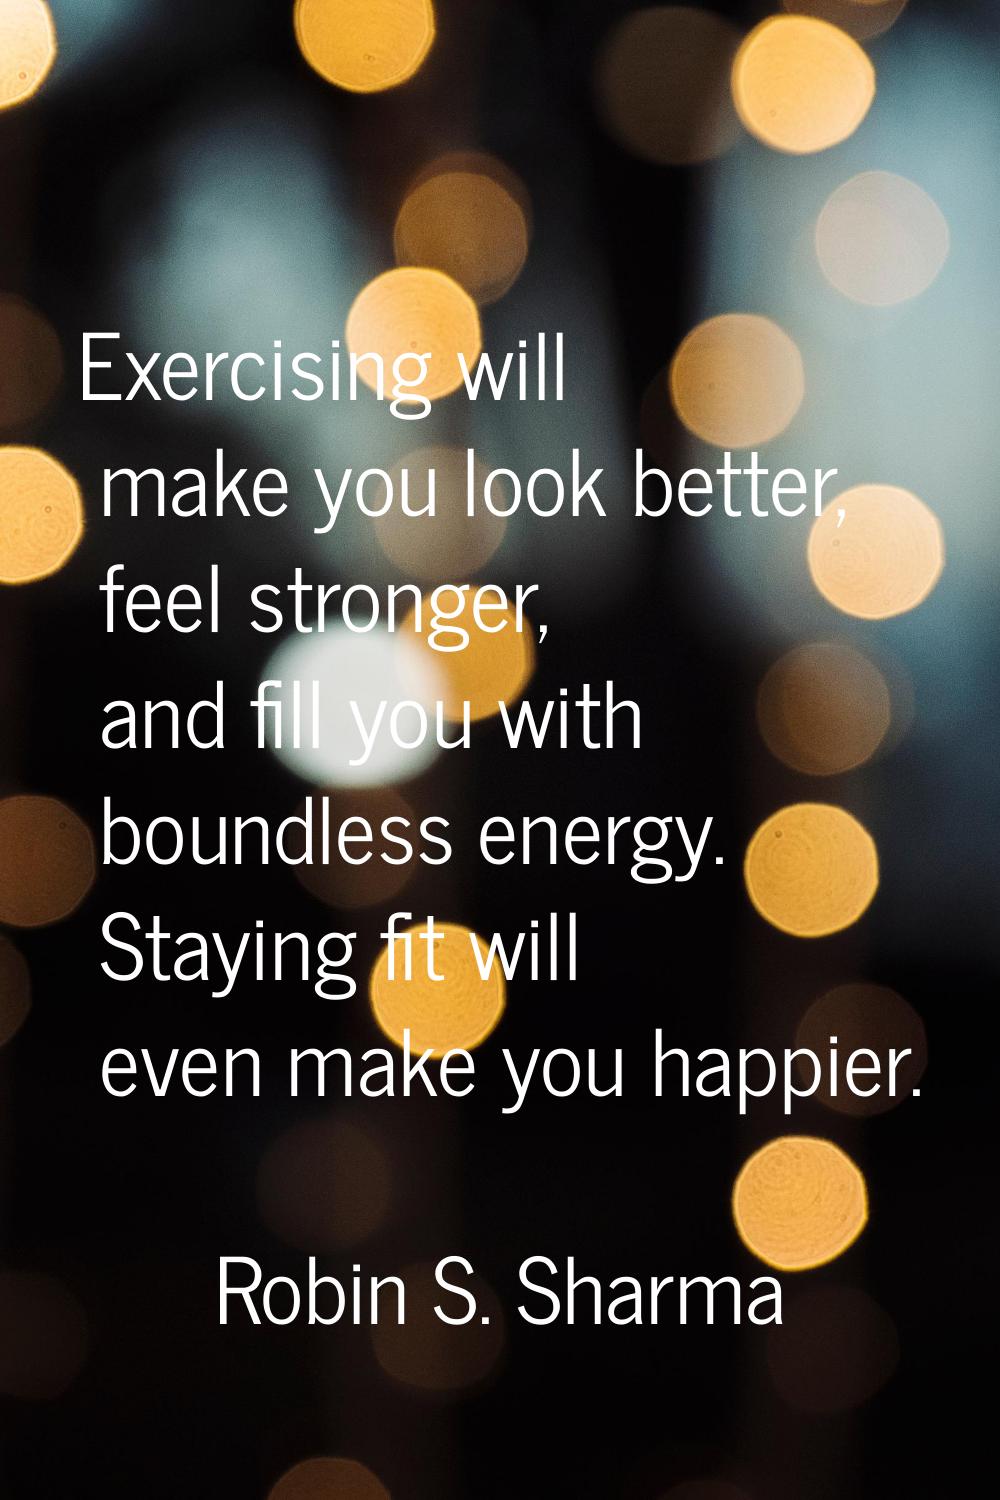 Exercising will make you look better, feel stronger, and fill you with boundless energy. Staying fi